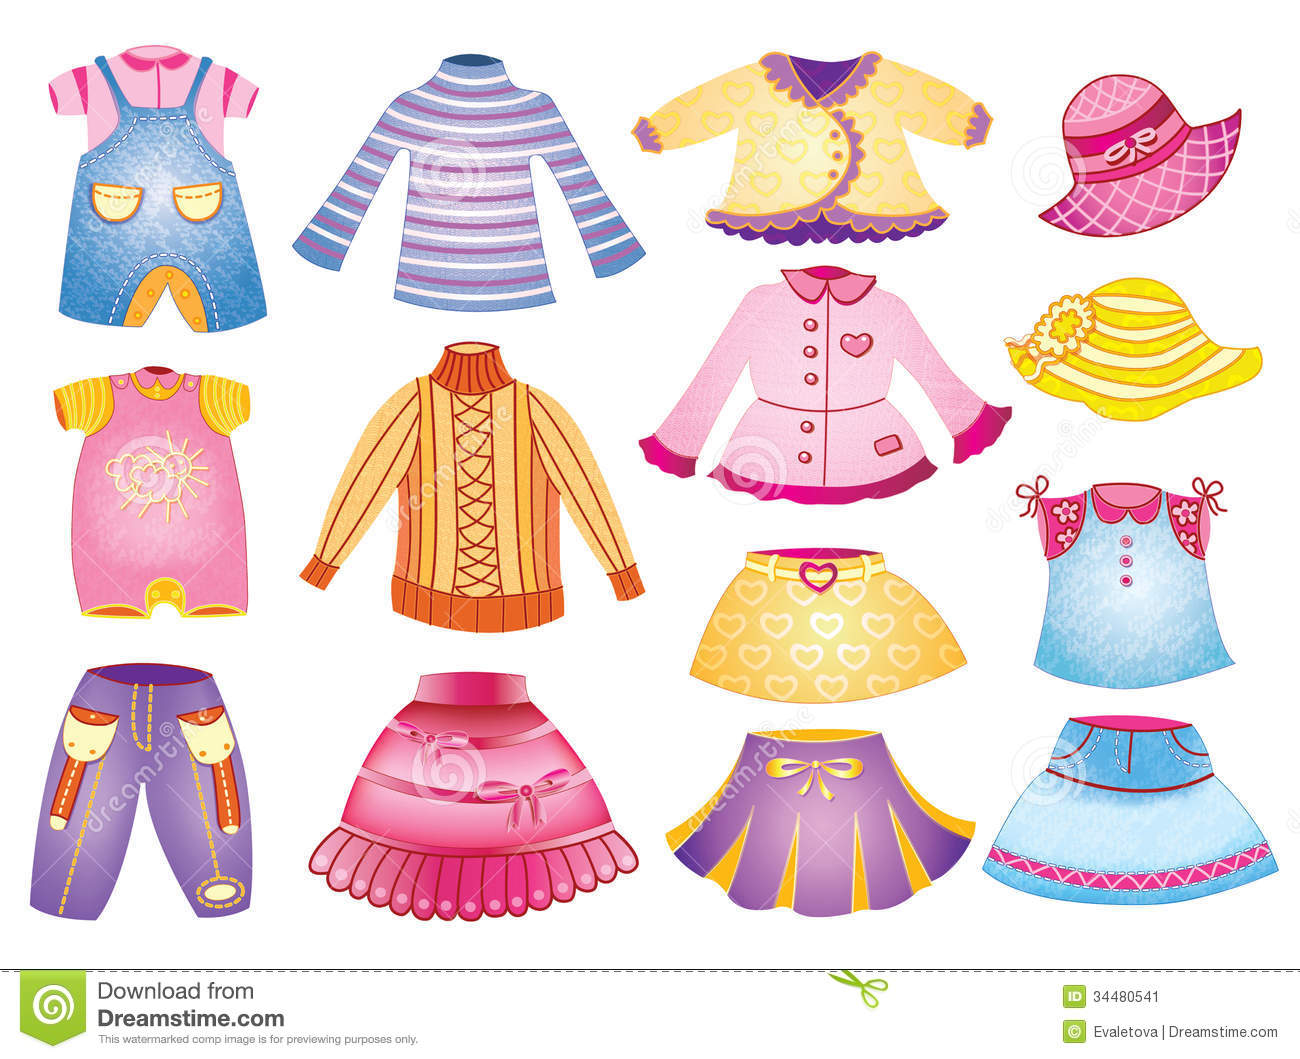 Clothes clipart for kids.